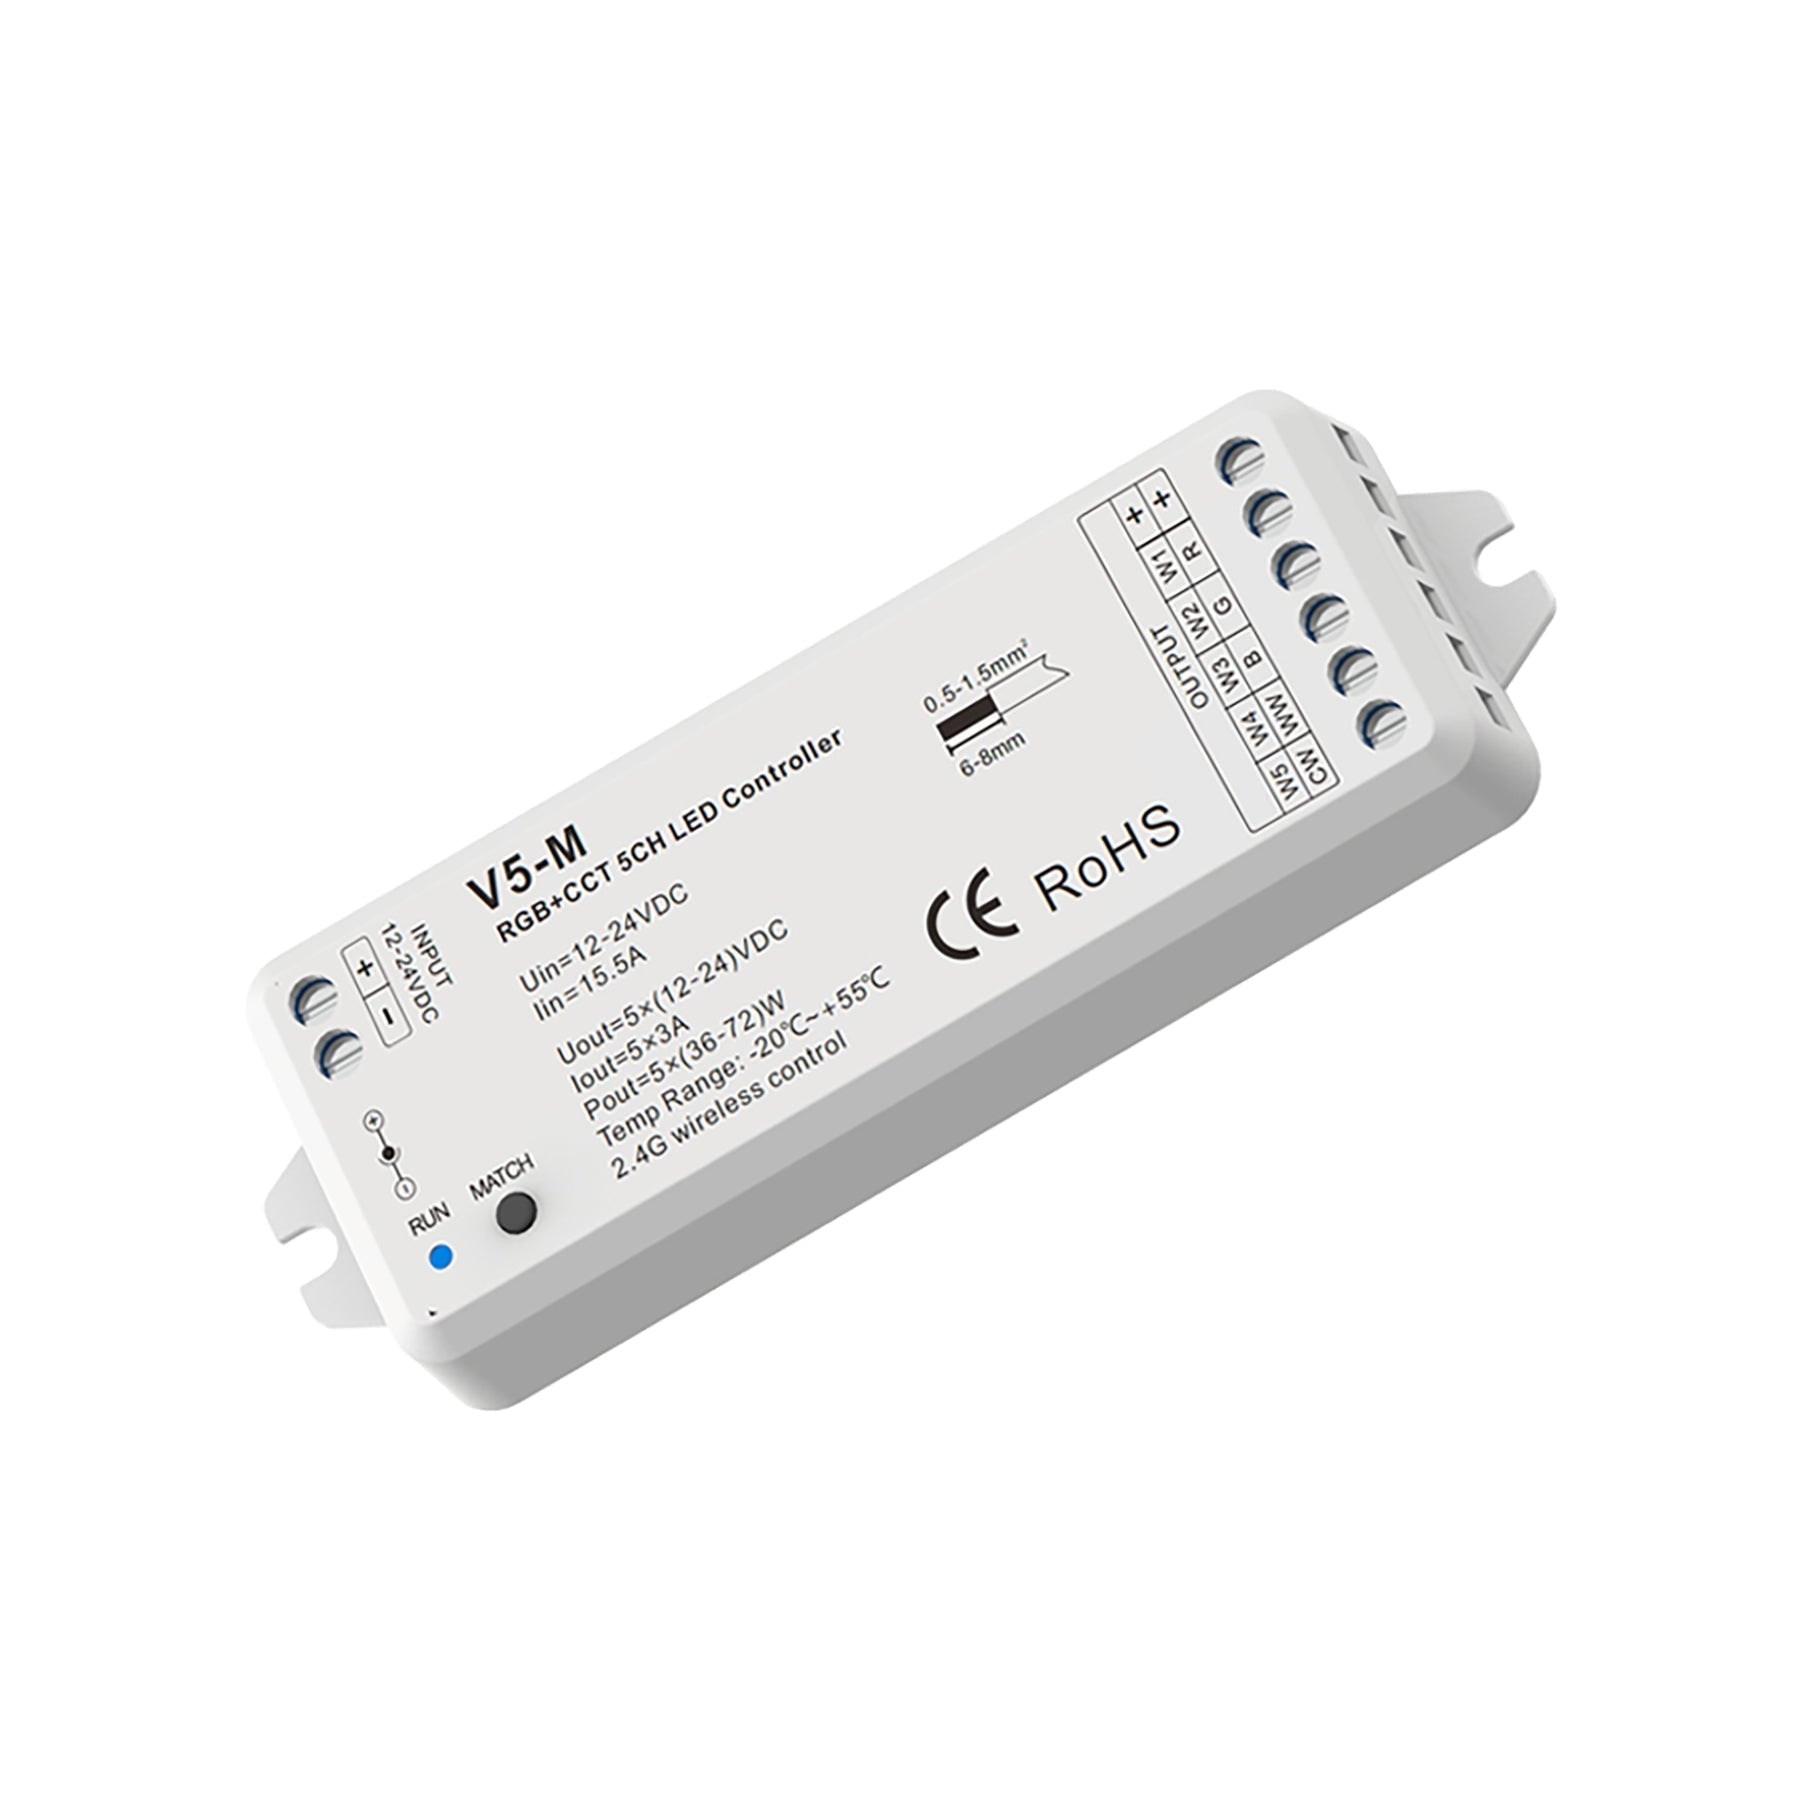 G.W.S. LED LED 12-24V DC RGB+CCT Controller V5-M + 4 Zone Panel Remote Control 2*AAA Battery T25